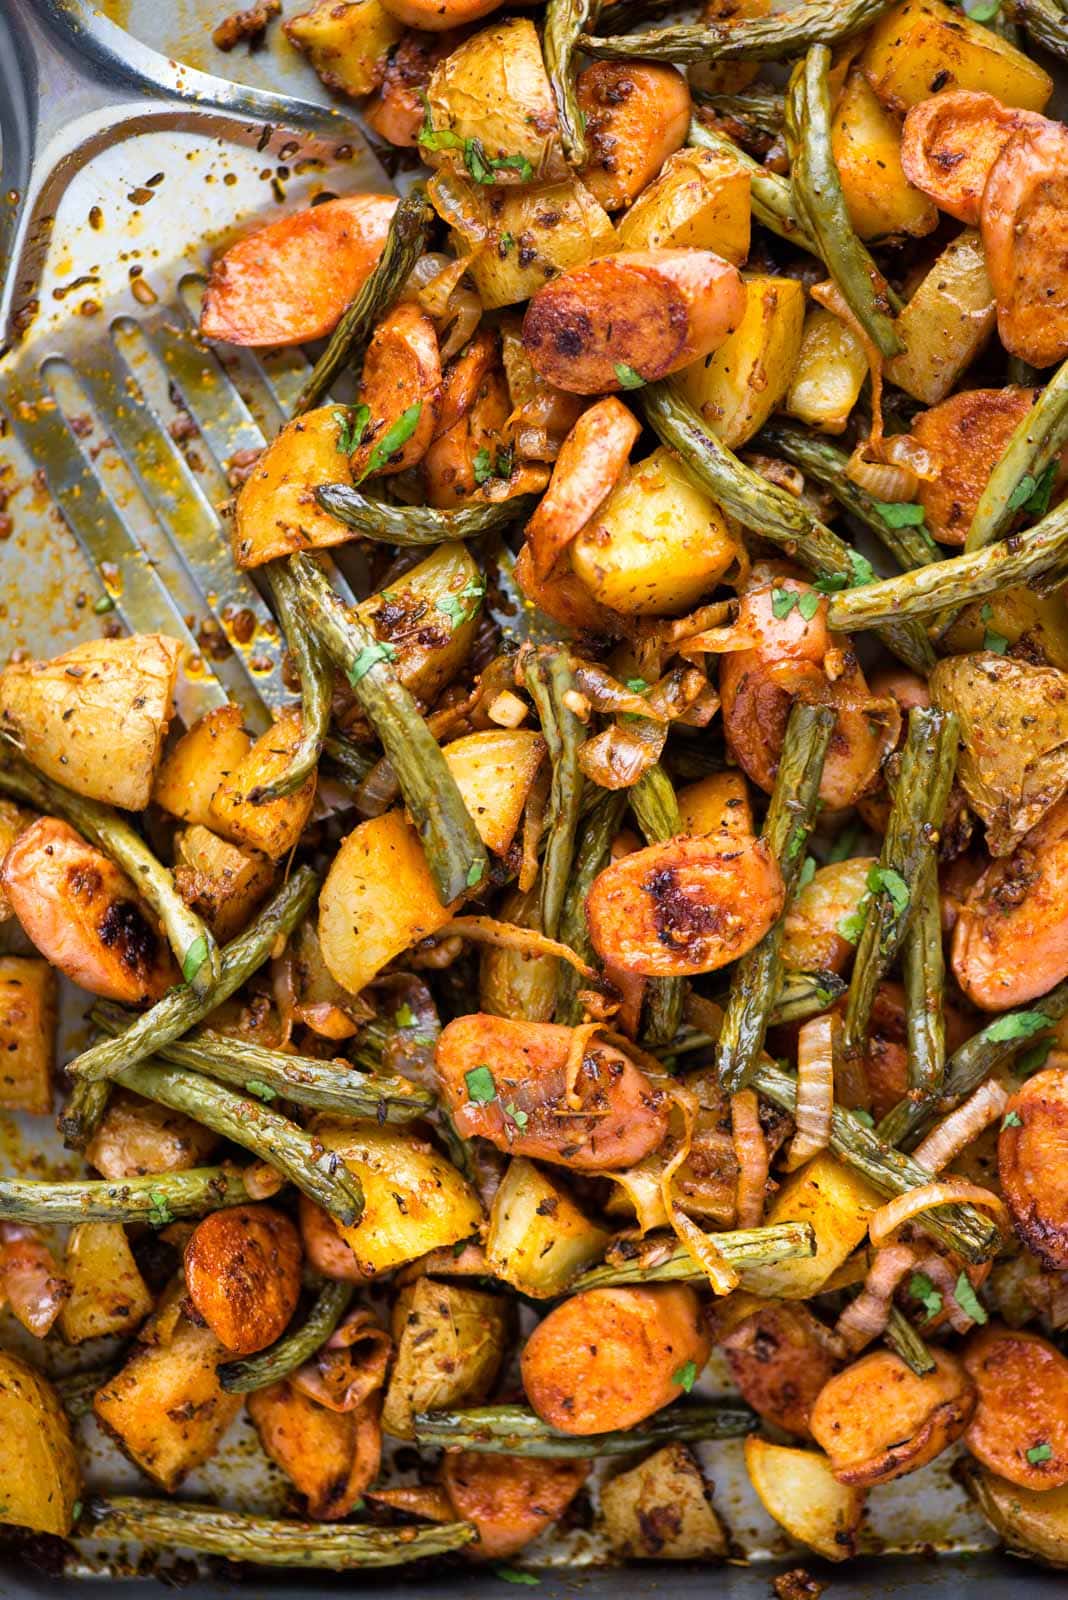 Sausage and potatoes- This super easy and delicious dinner is cooked in a Sheet pan with 10 minutes prep. Potatoes, sausage, green beans, and onion are tossed in a buttery dressing and baked to perfection. 